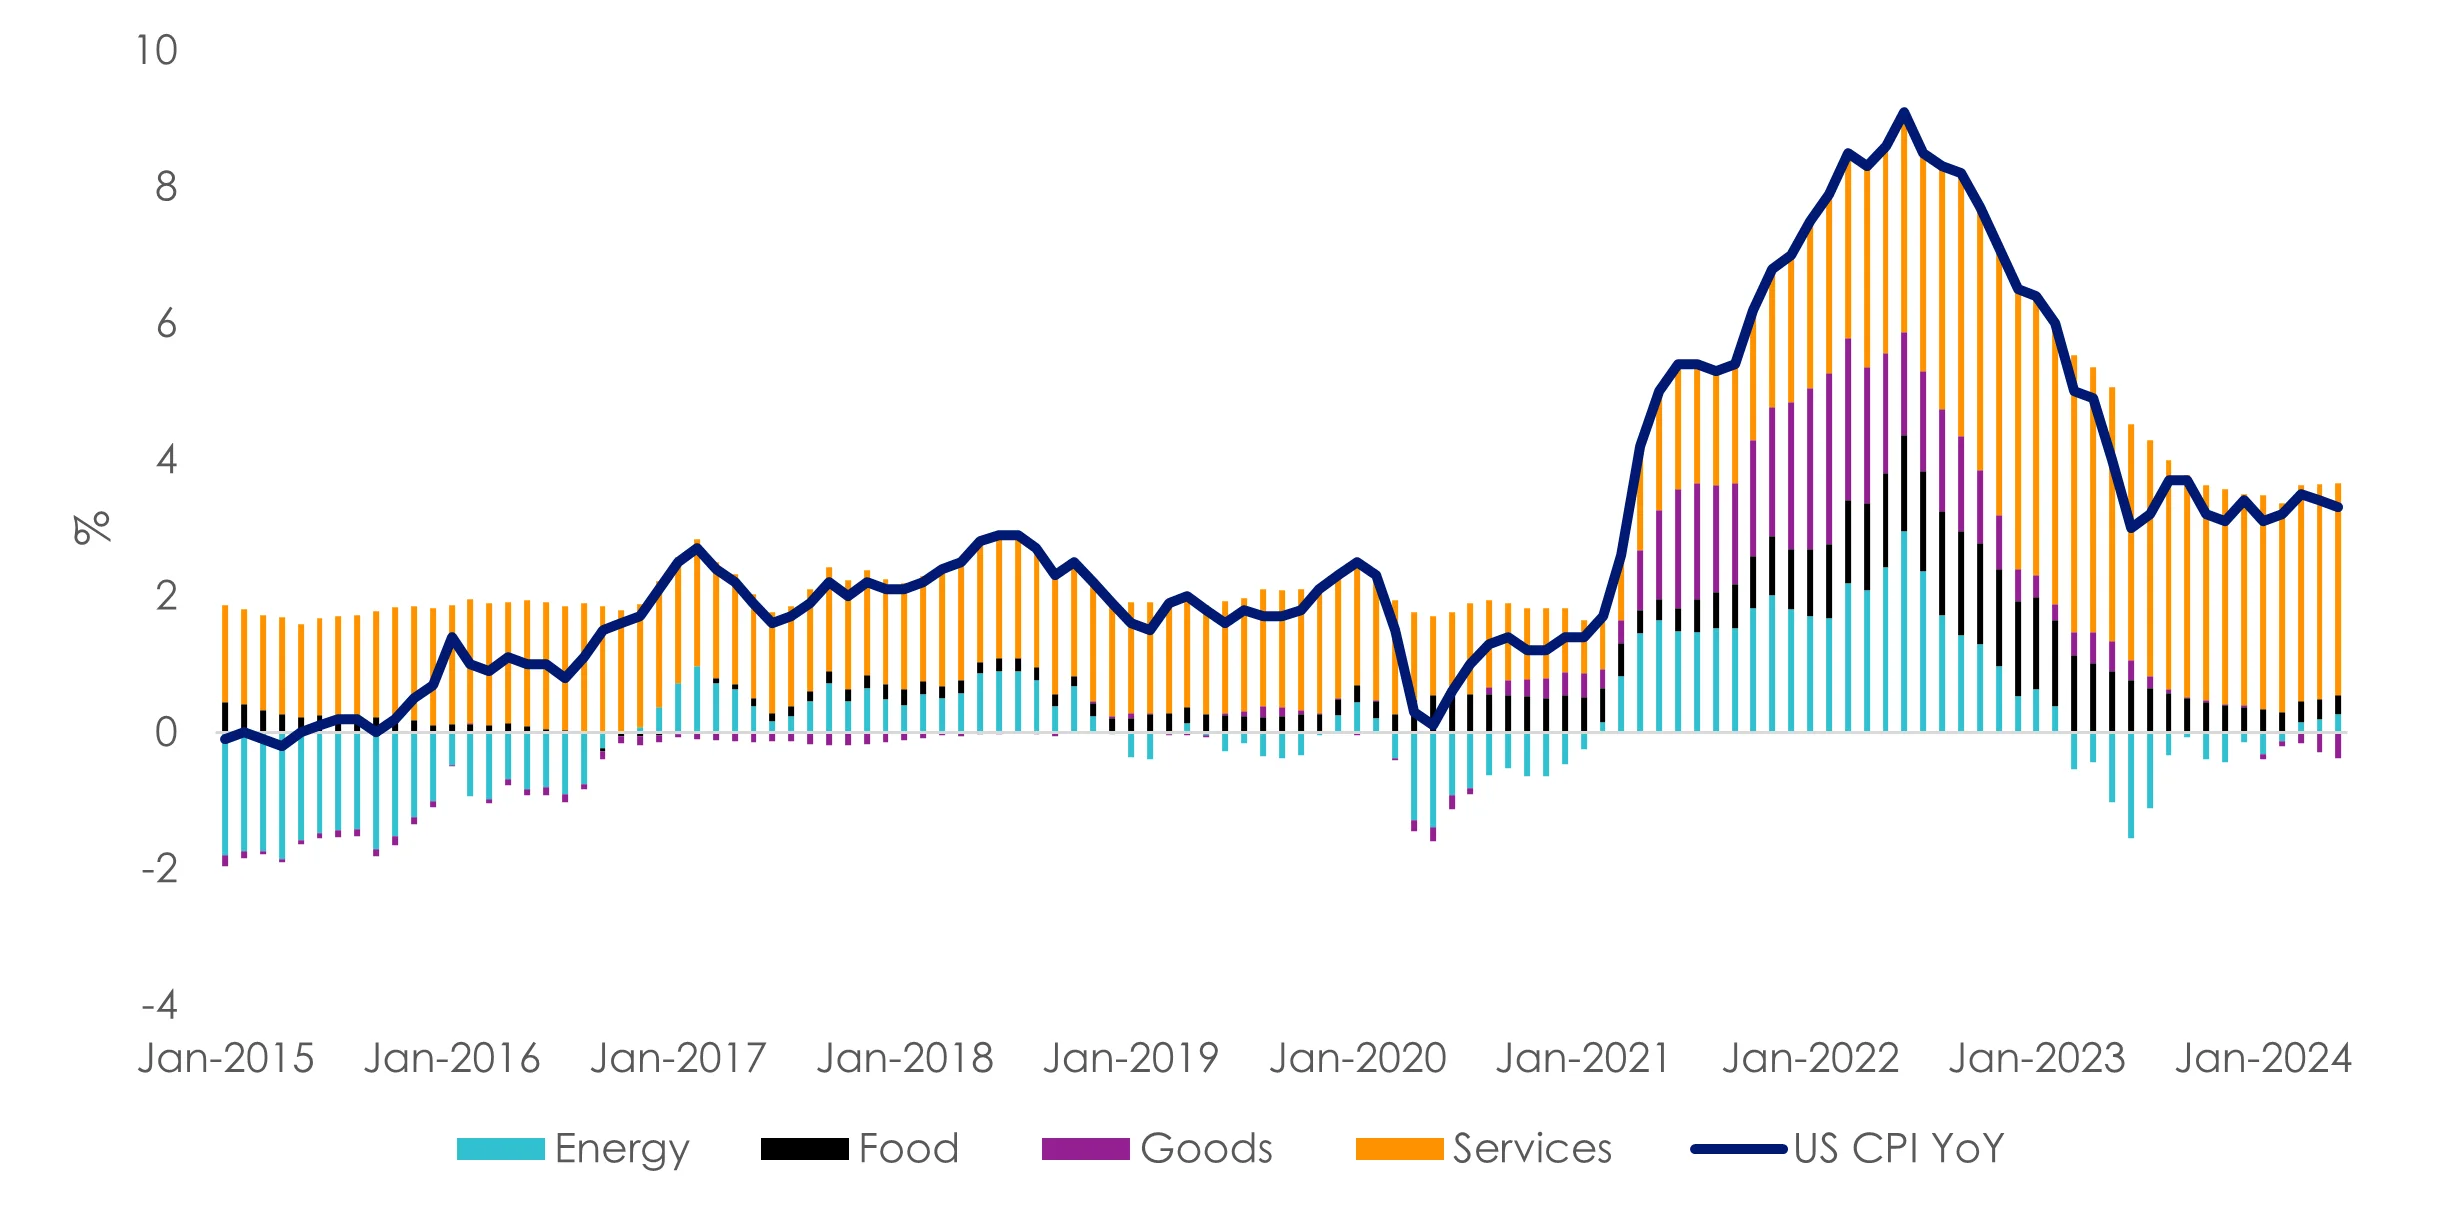 US Inflation year on year by components - Services inflation persistent